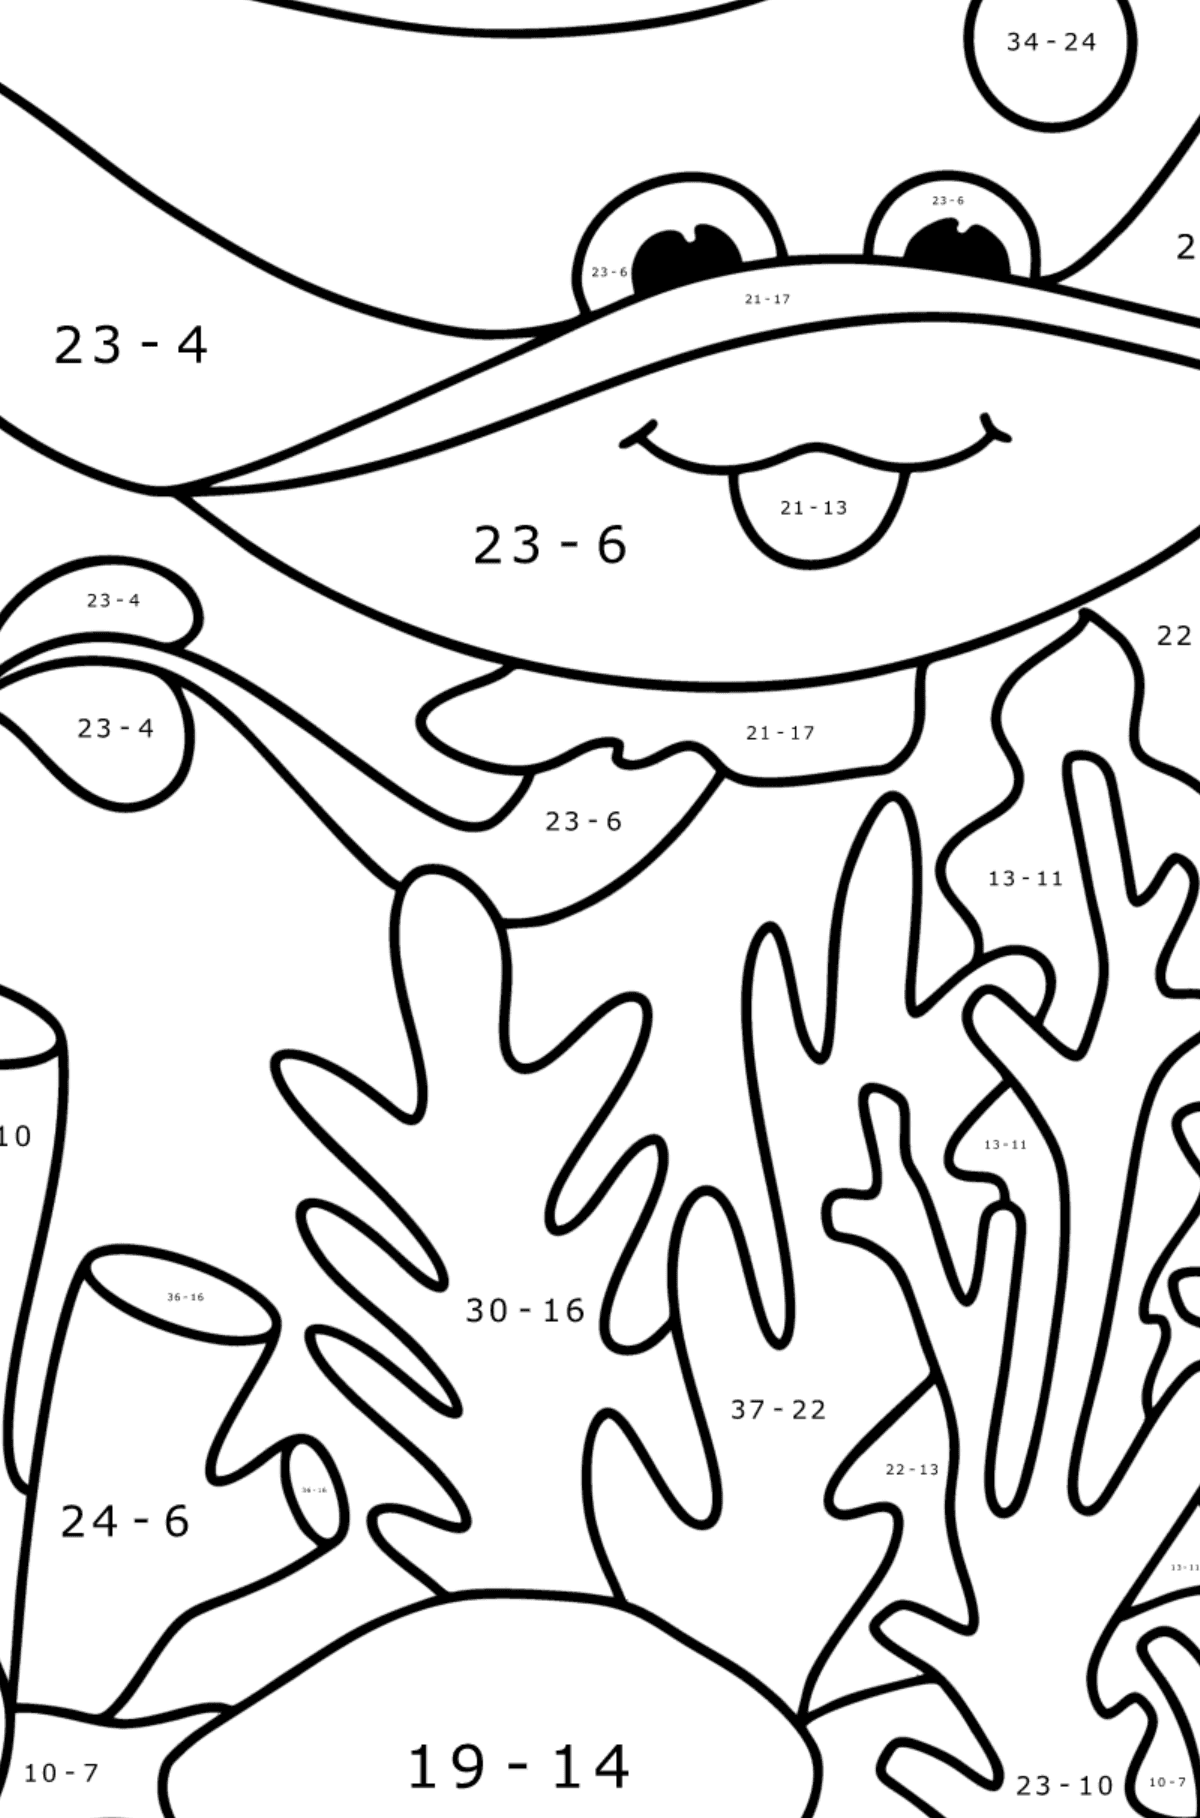 Stingray coloring page - Math Coloring - Subtraction for Kids